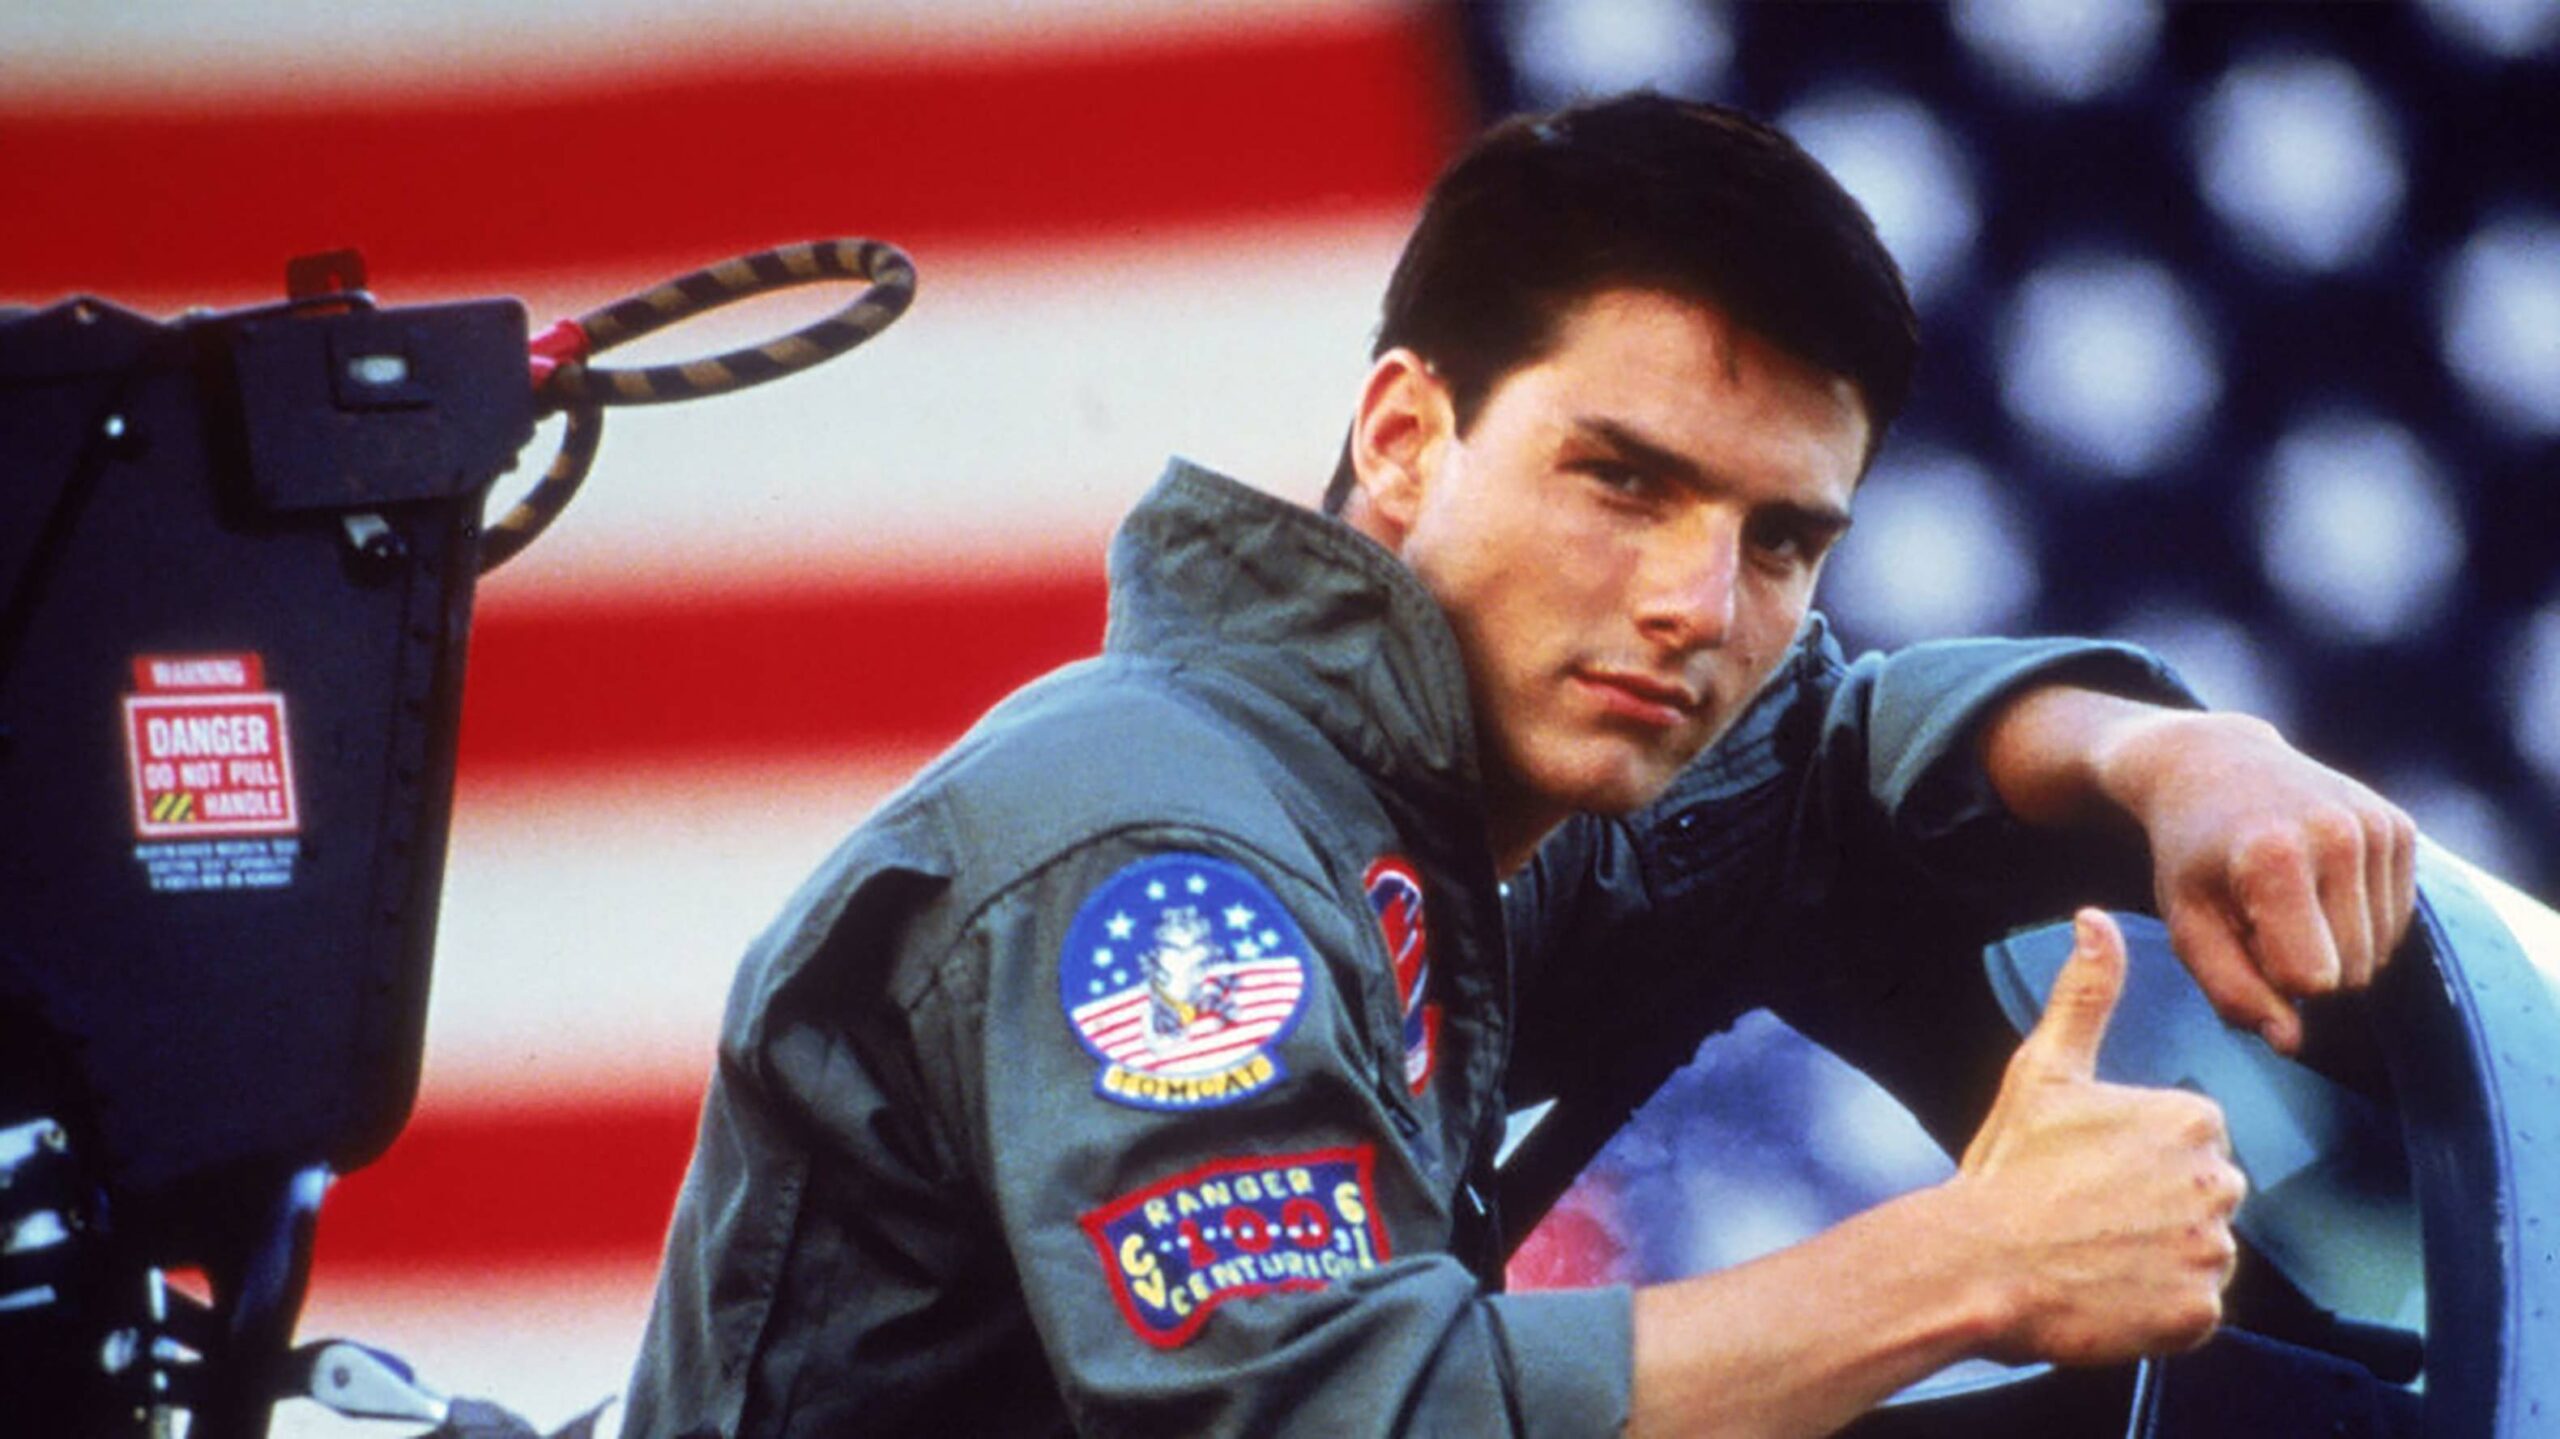 An image from 1986's Top Gun. Tom Cruise as Pete "Maverick" Mitchell is giving a thumbs up from the cockpit of a ship.